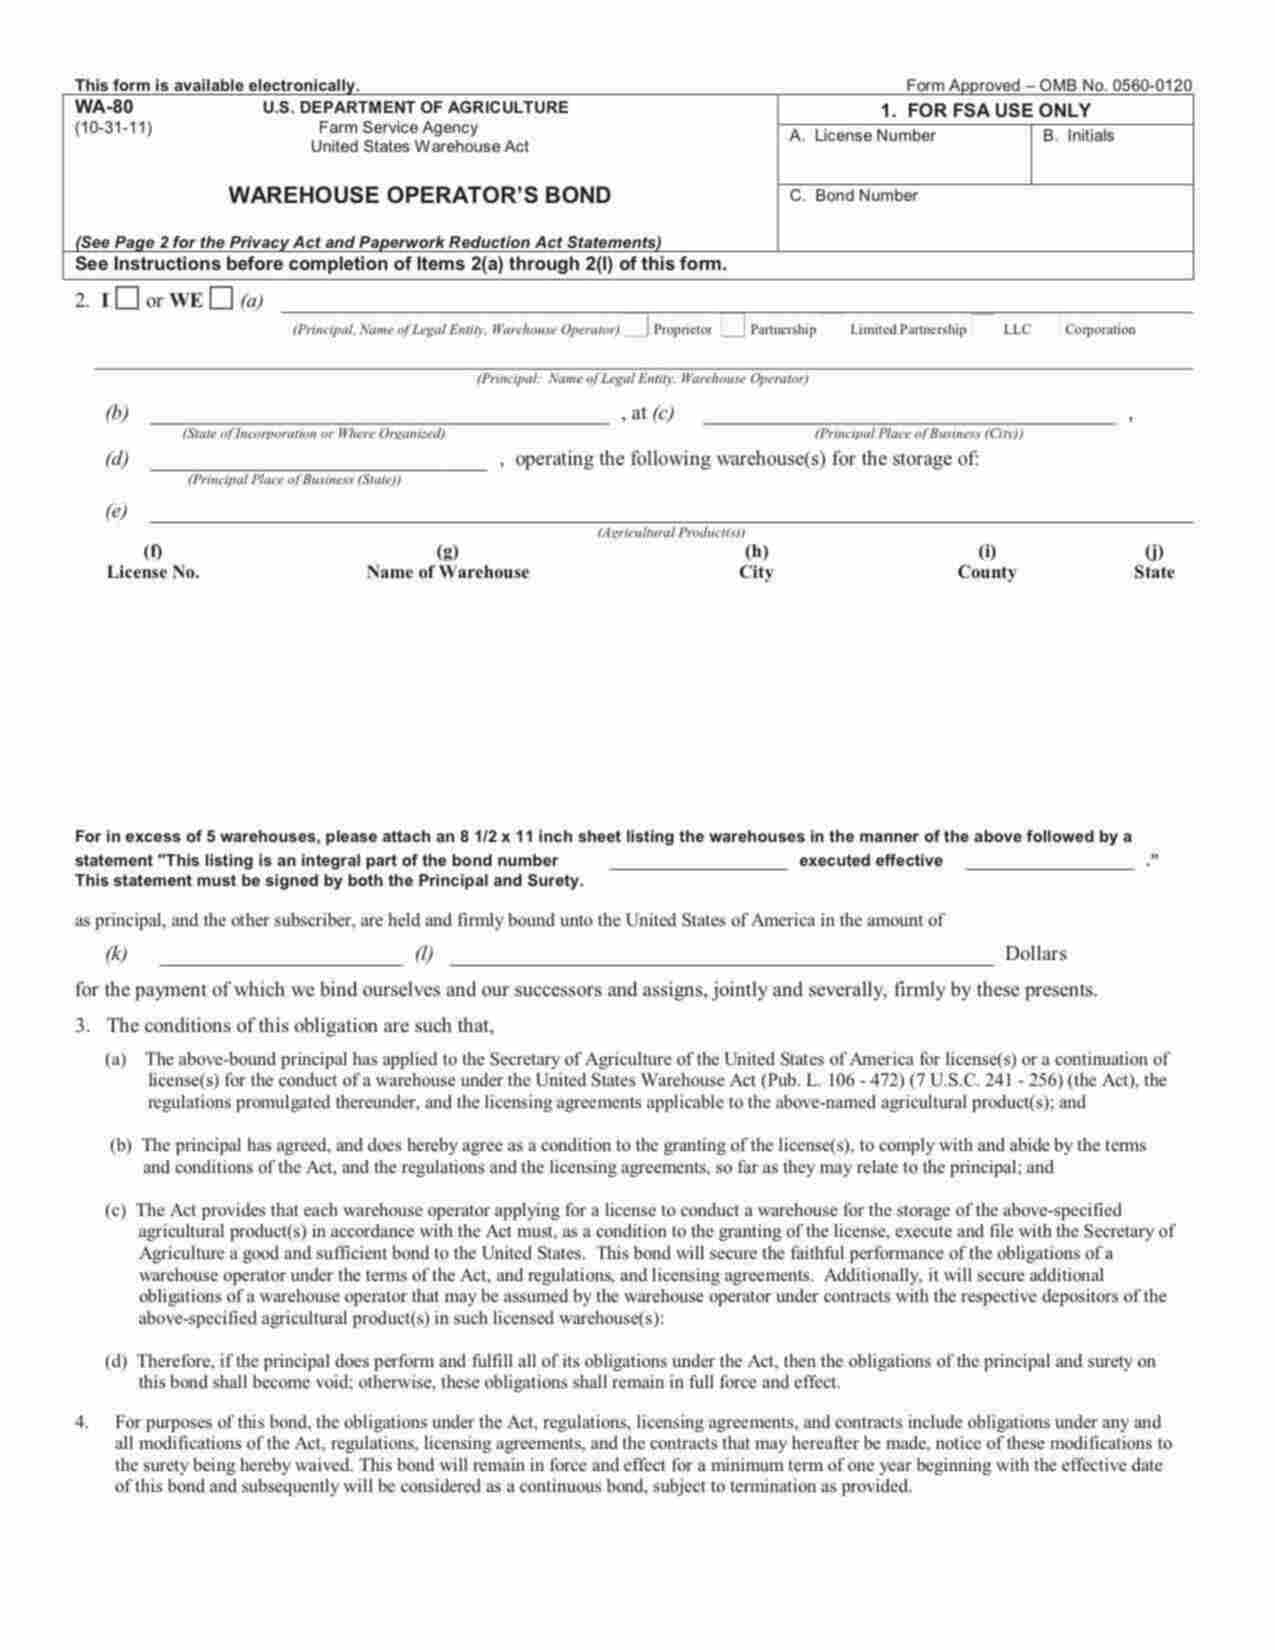 Federal Warehouse Operator: Other Agricultural Products Bond Form